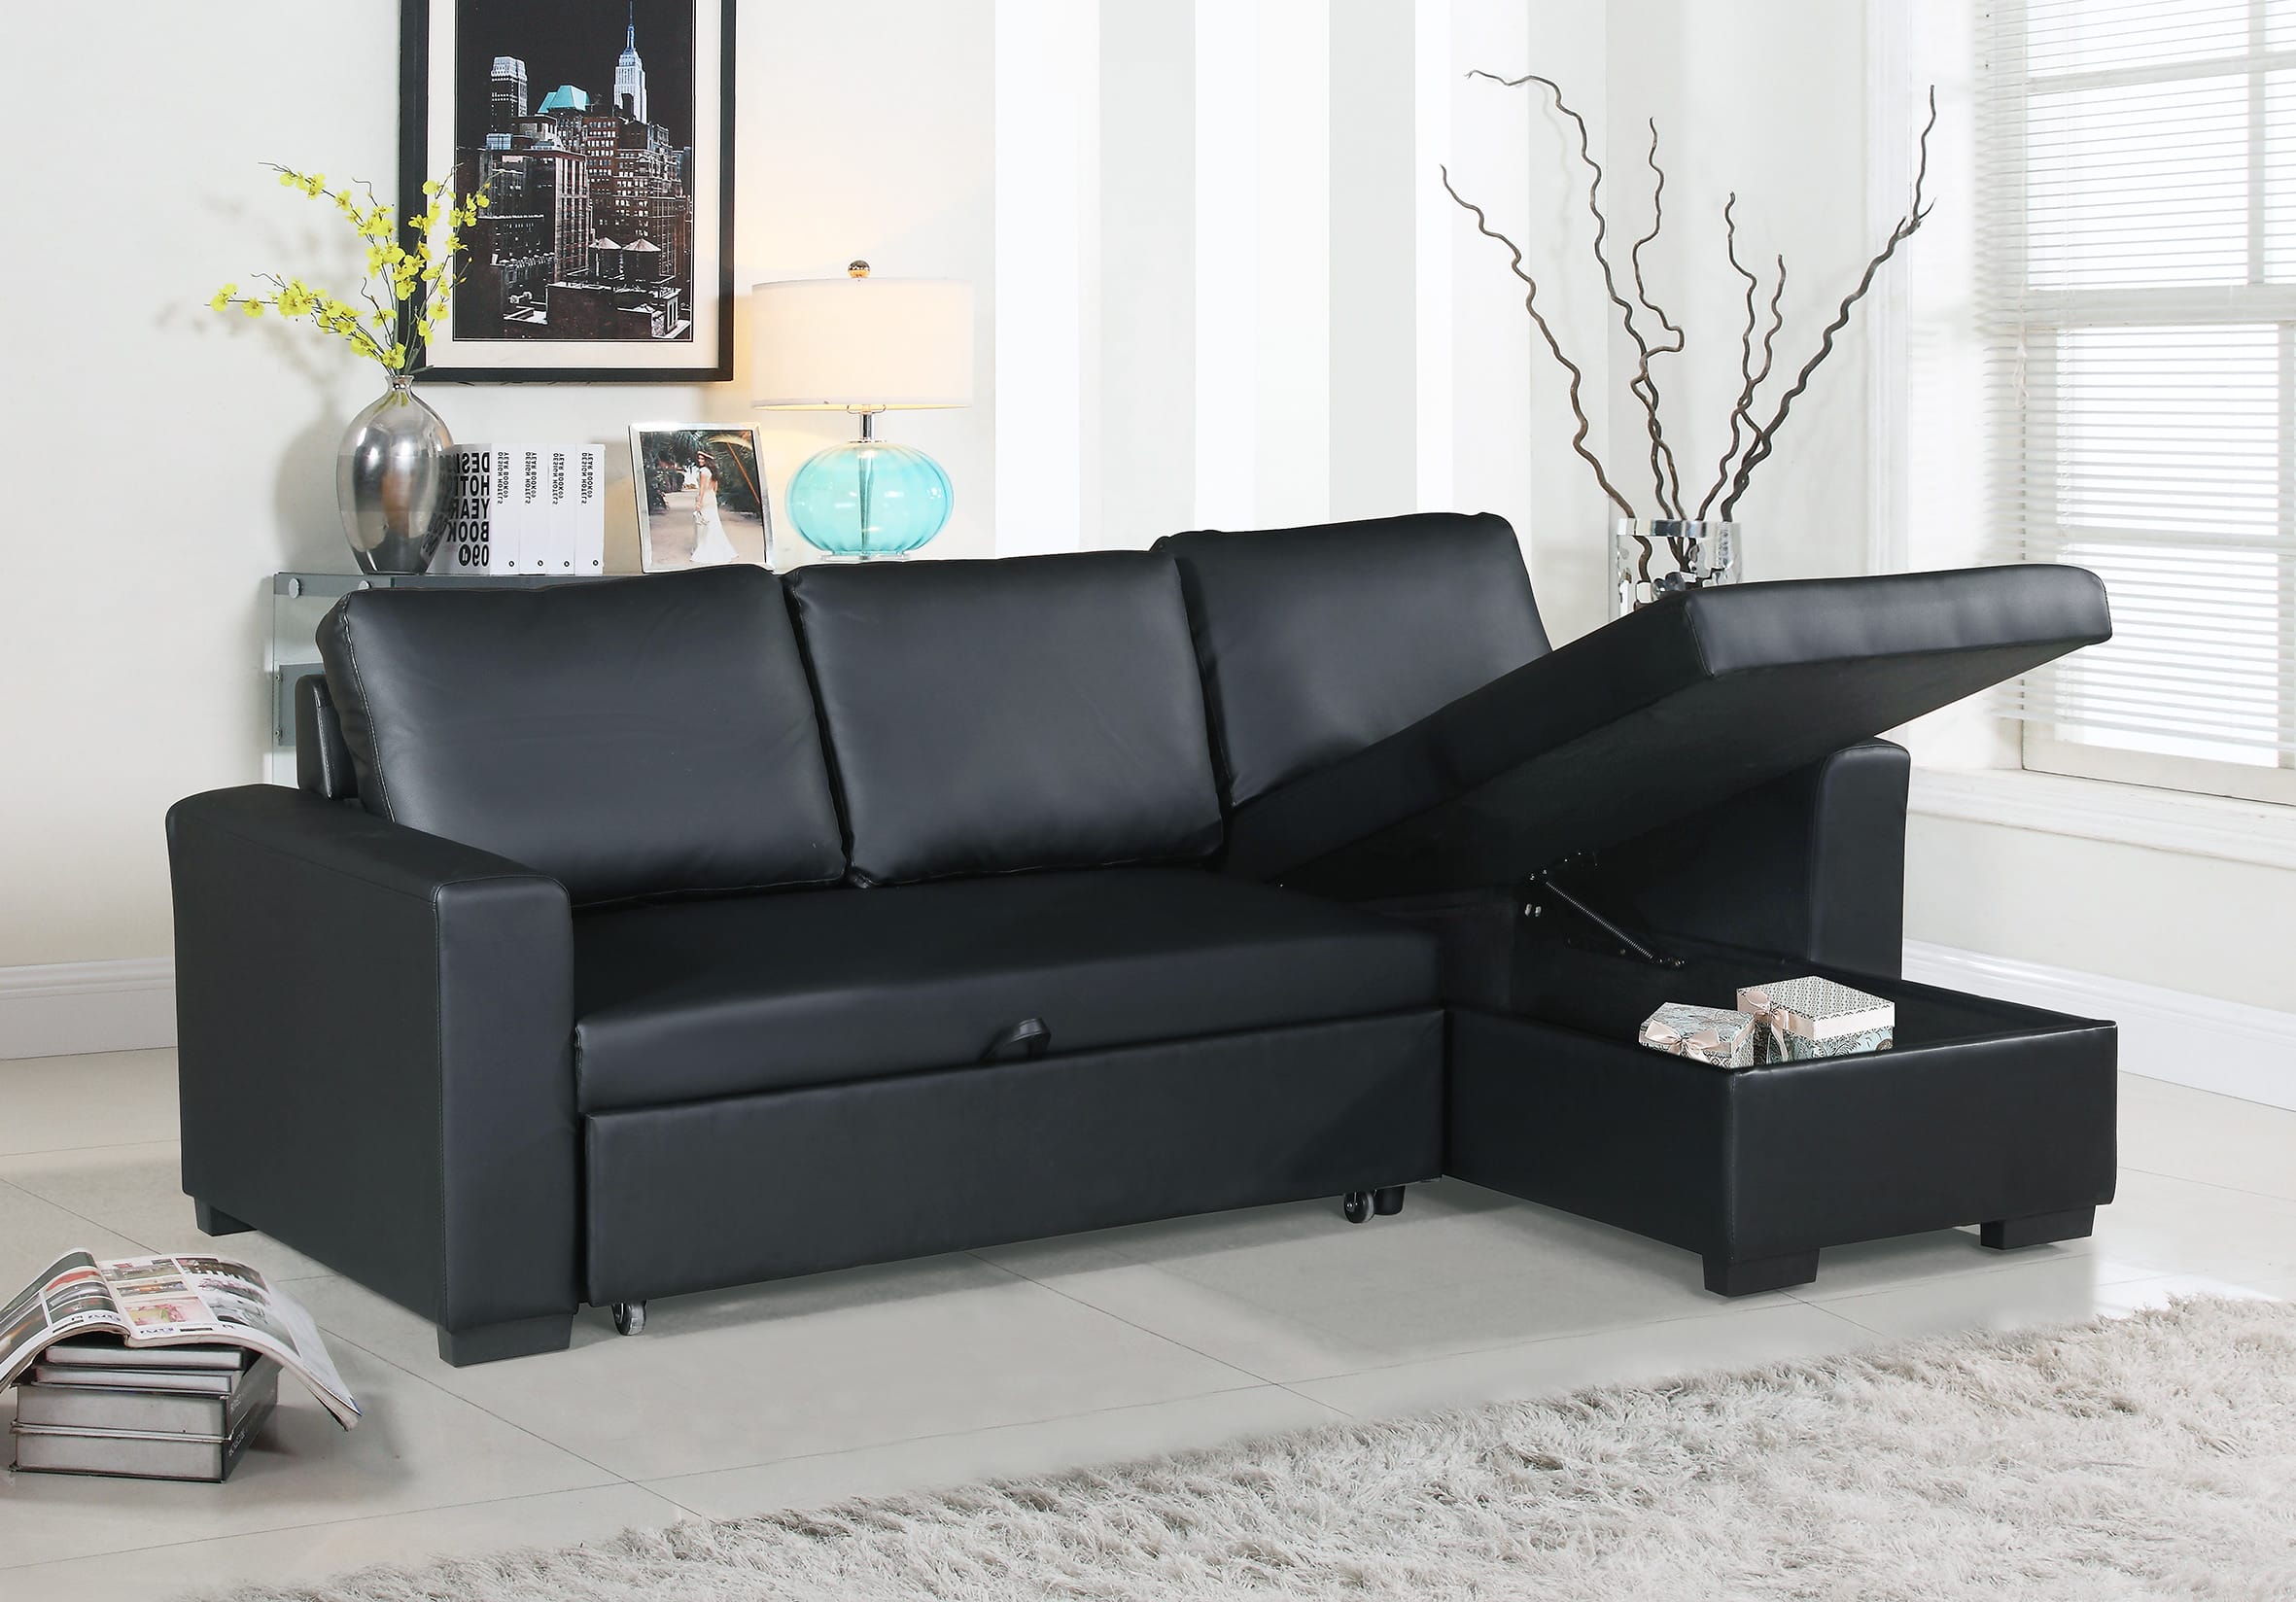 F6890 Black Convertible Sectional Sofa By Poundex